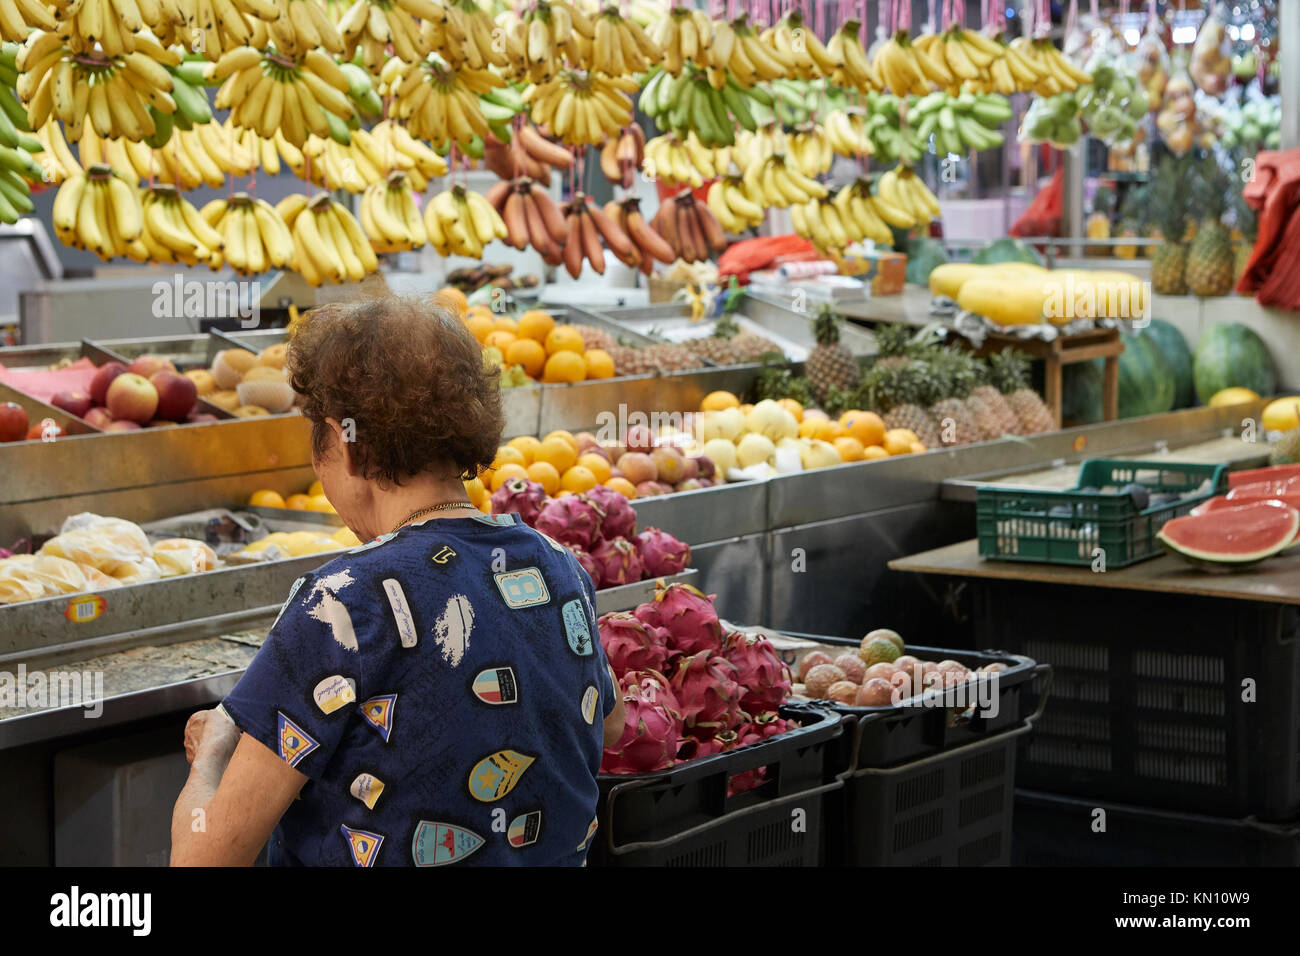 Oriental Woman Shopping At A Fruit Stall In The Tiong Bahru Market And Food Centre, Tiong Bahru, Singapore. Stock Photo